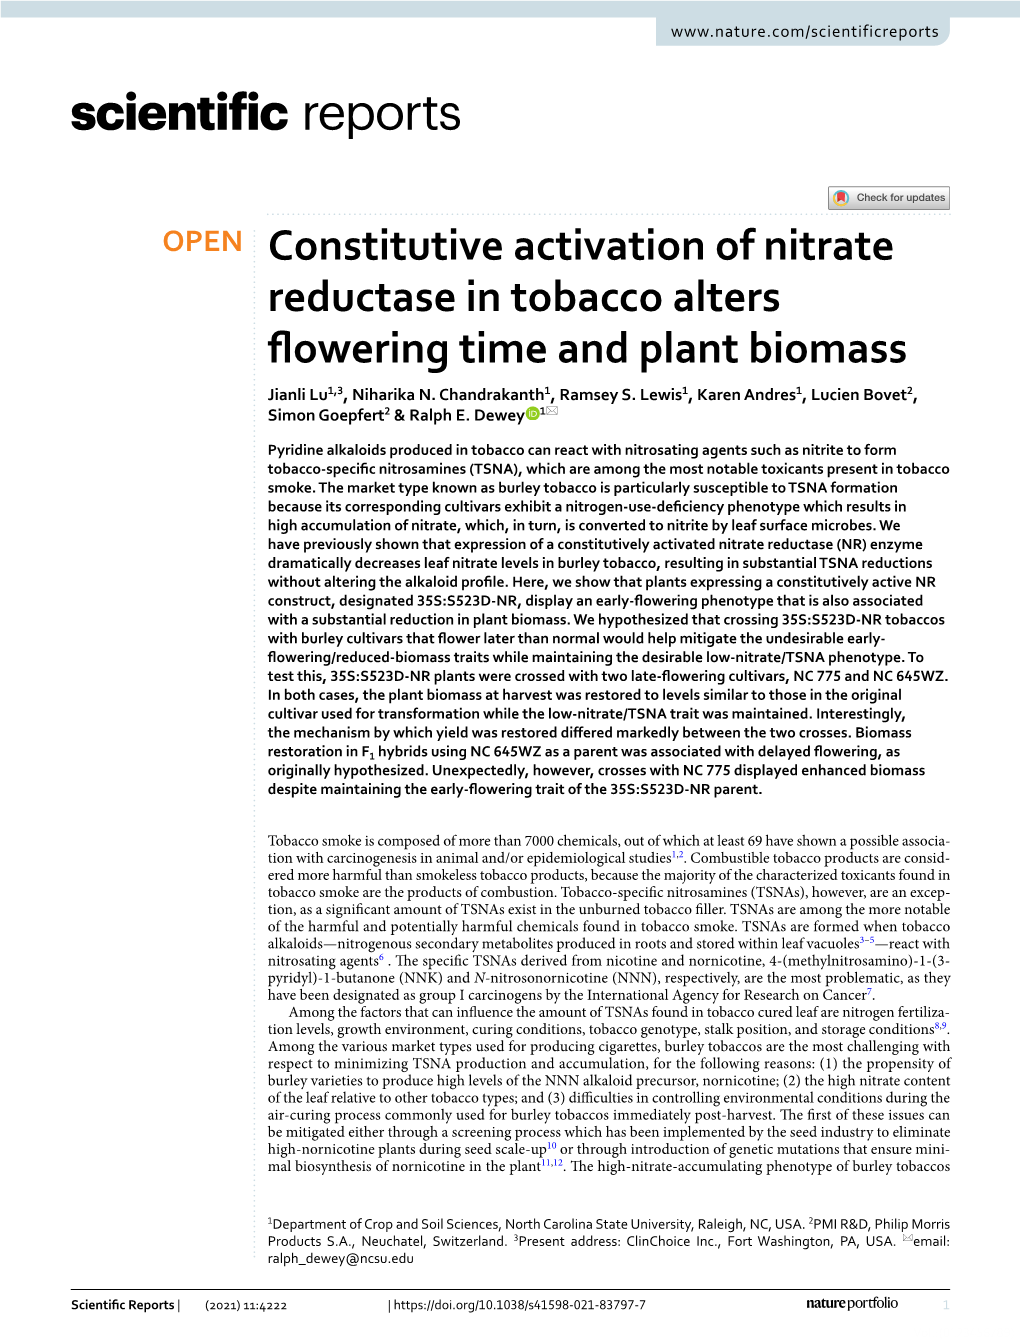 Constitutive Activation of Nitrate Reductase in Tobacco Alters Fowering Time and Plant Biomass Jianli Lu1,3, Niharika N